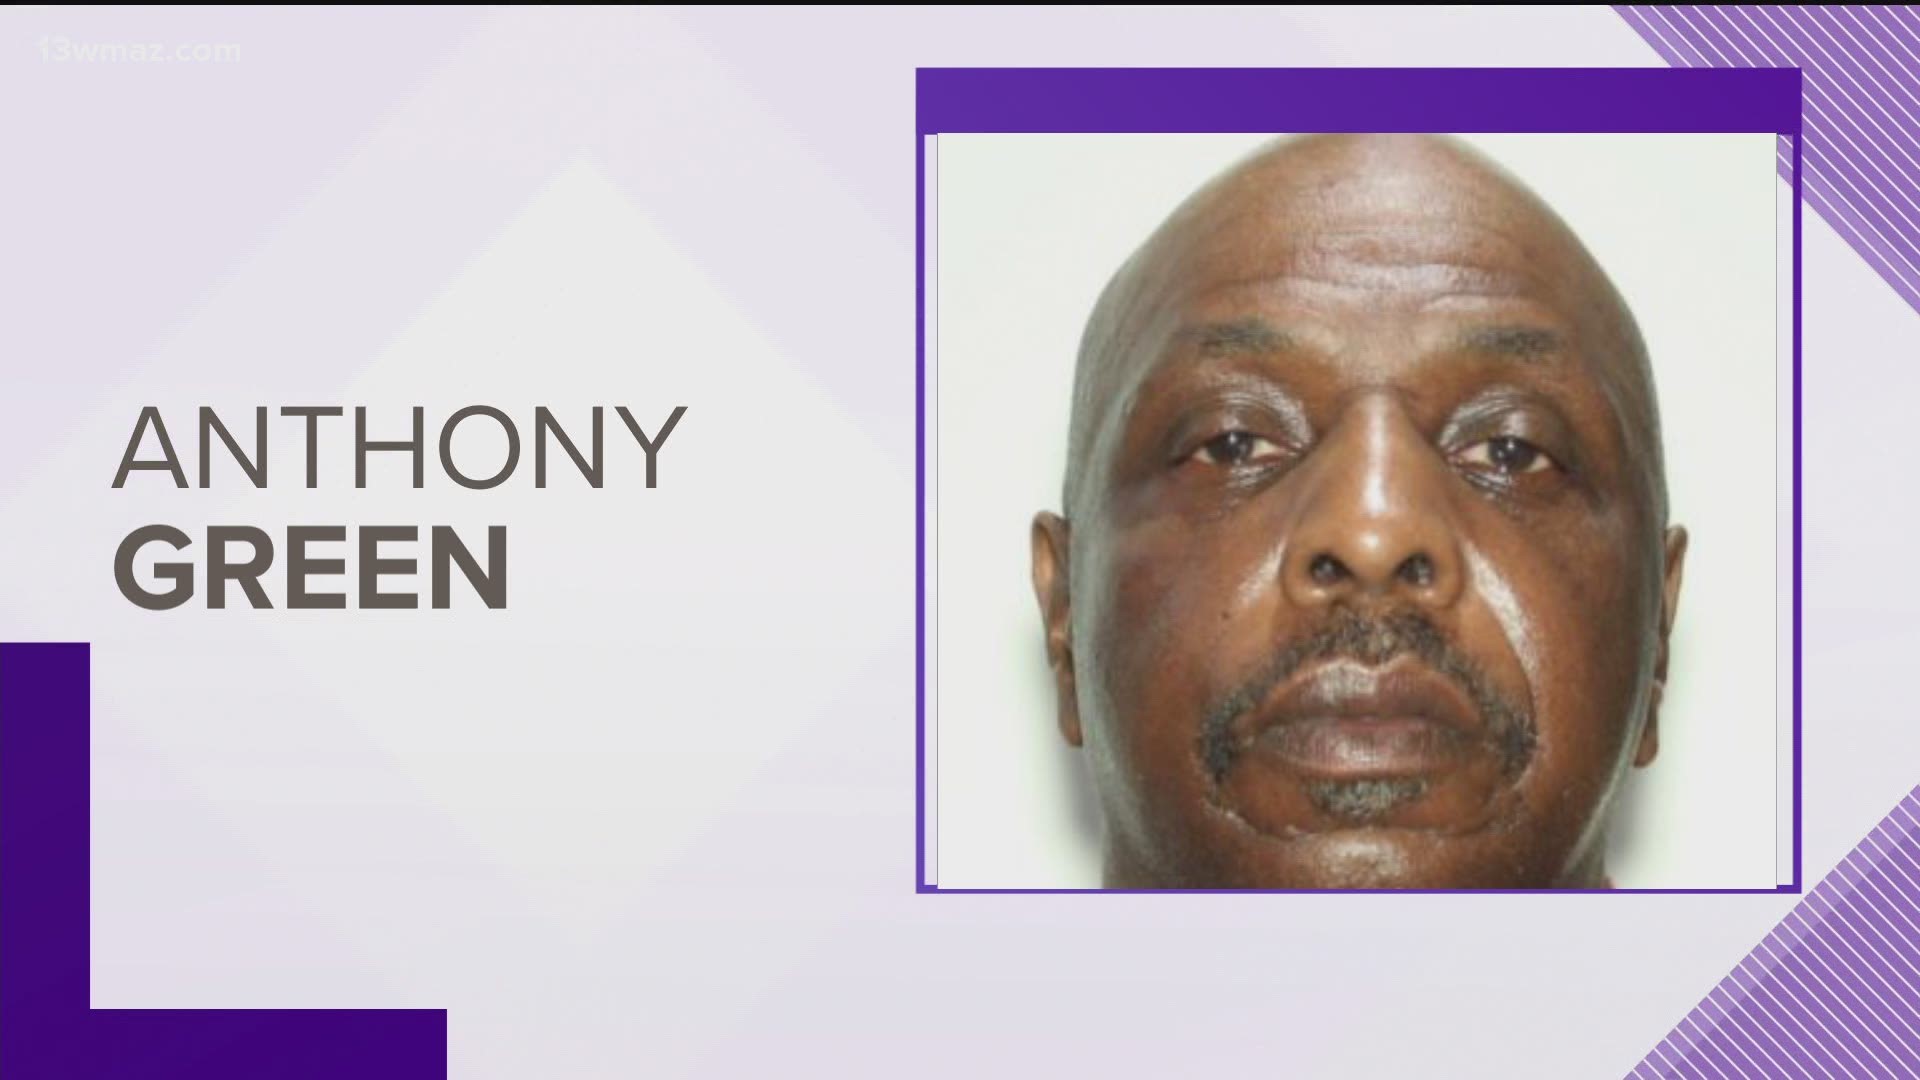 Investigators have arrested 57-year-old Anthony Cyril Green, of Macon, in connection to the shooting.